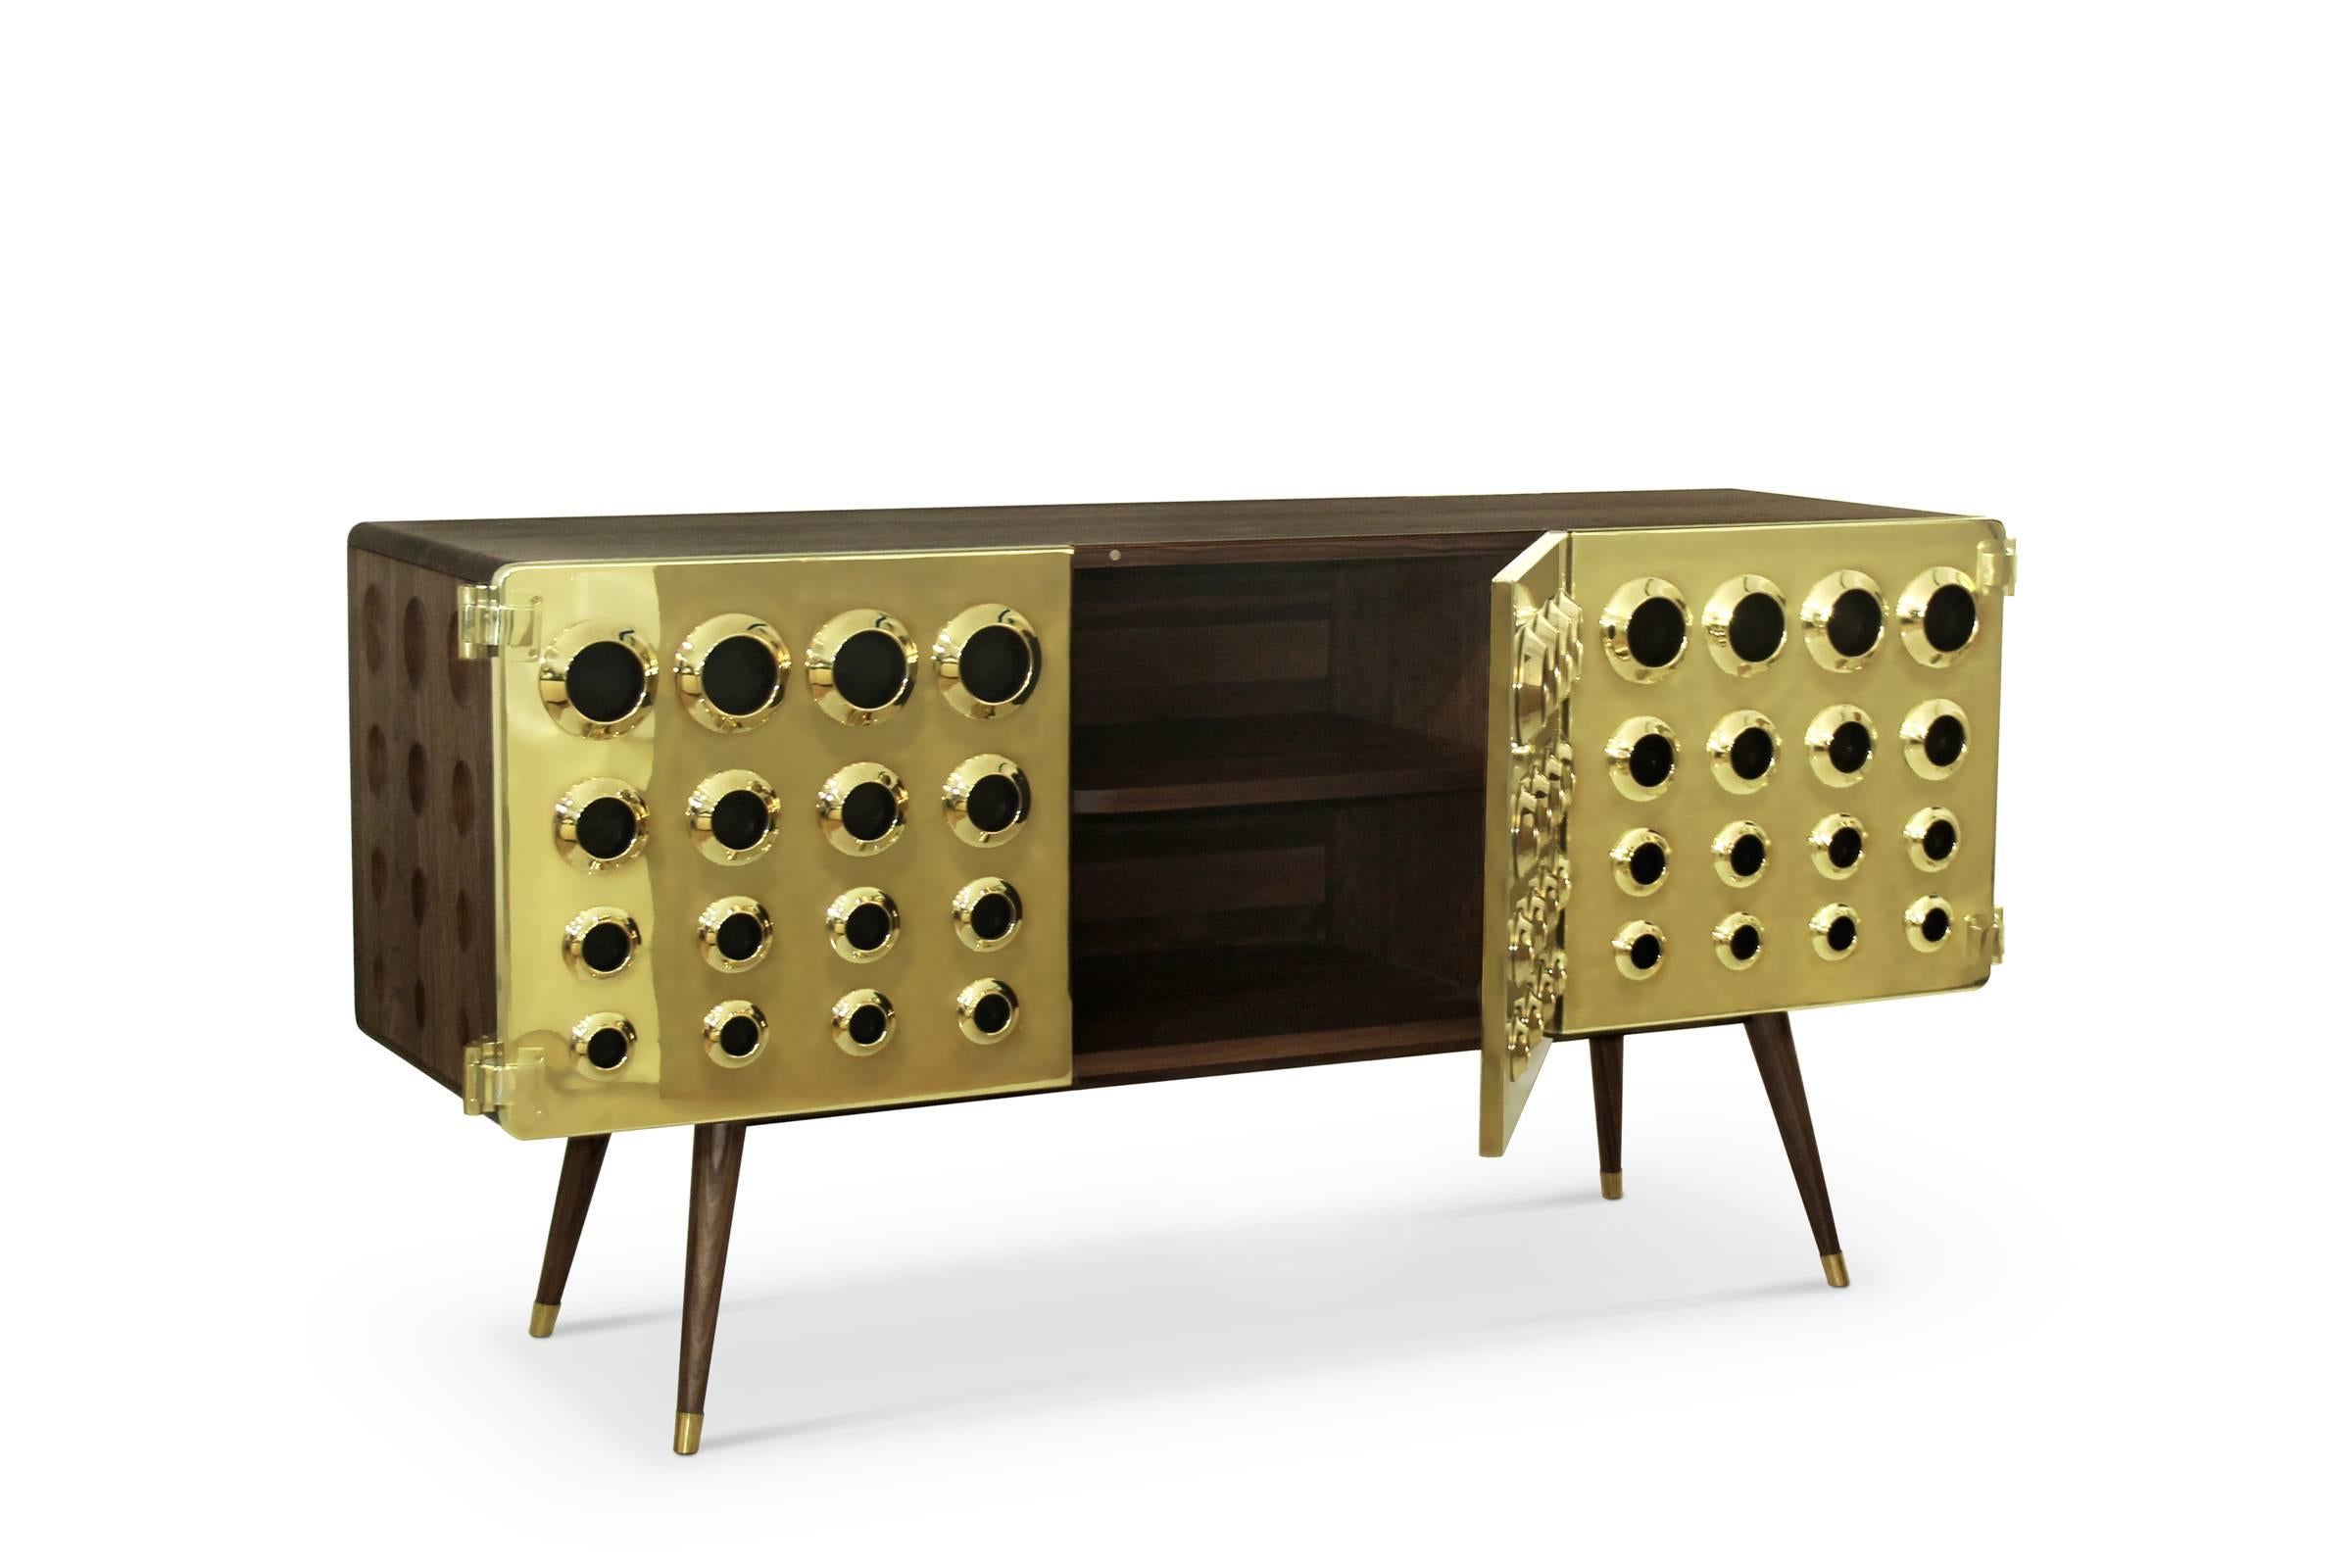 Sideboard golden doors in solid walnut wood
and polished brass and UV-resistant clear acrylic coating.
